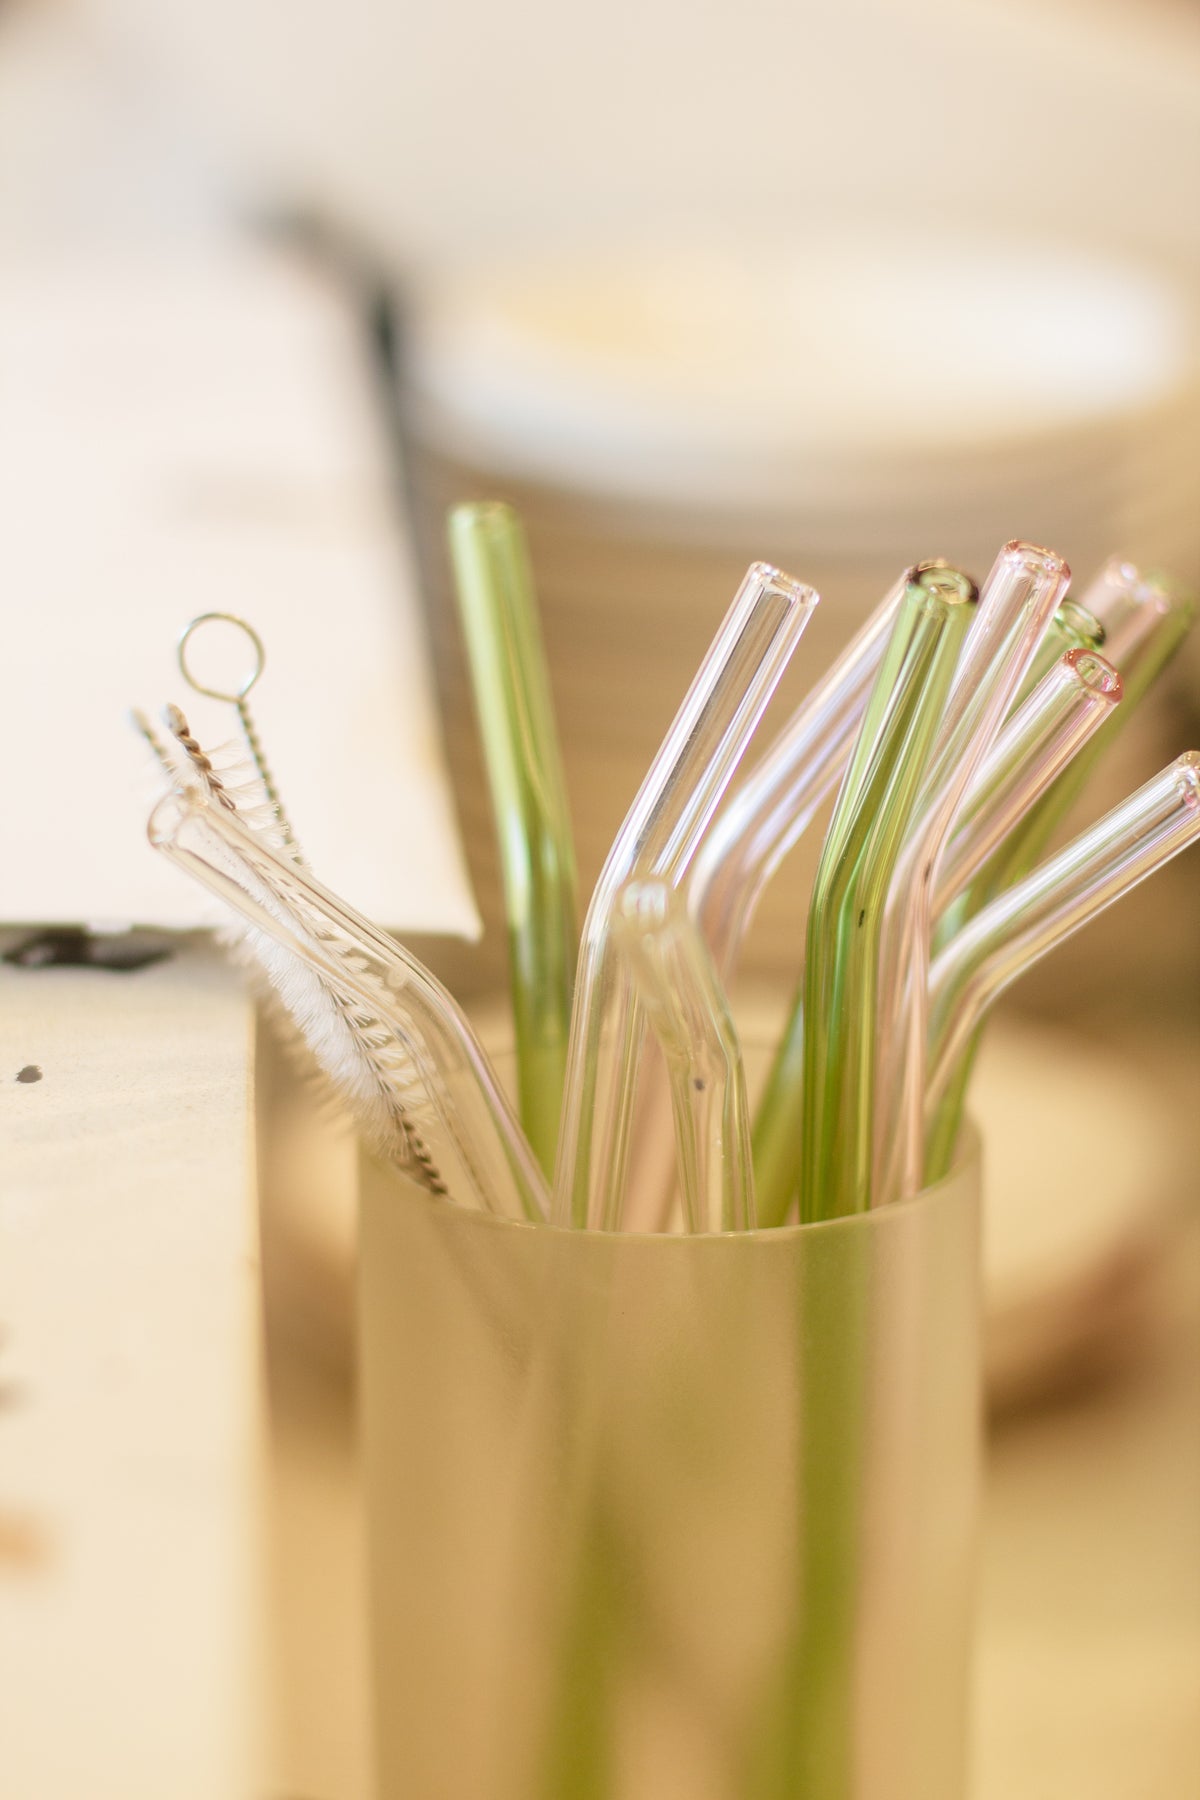 Bamboo Straw: Check Out This Non-Metal Reusable Straw!